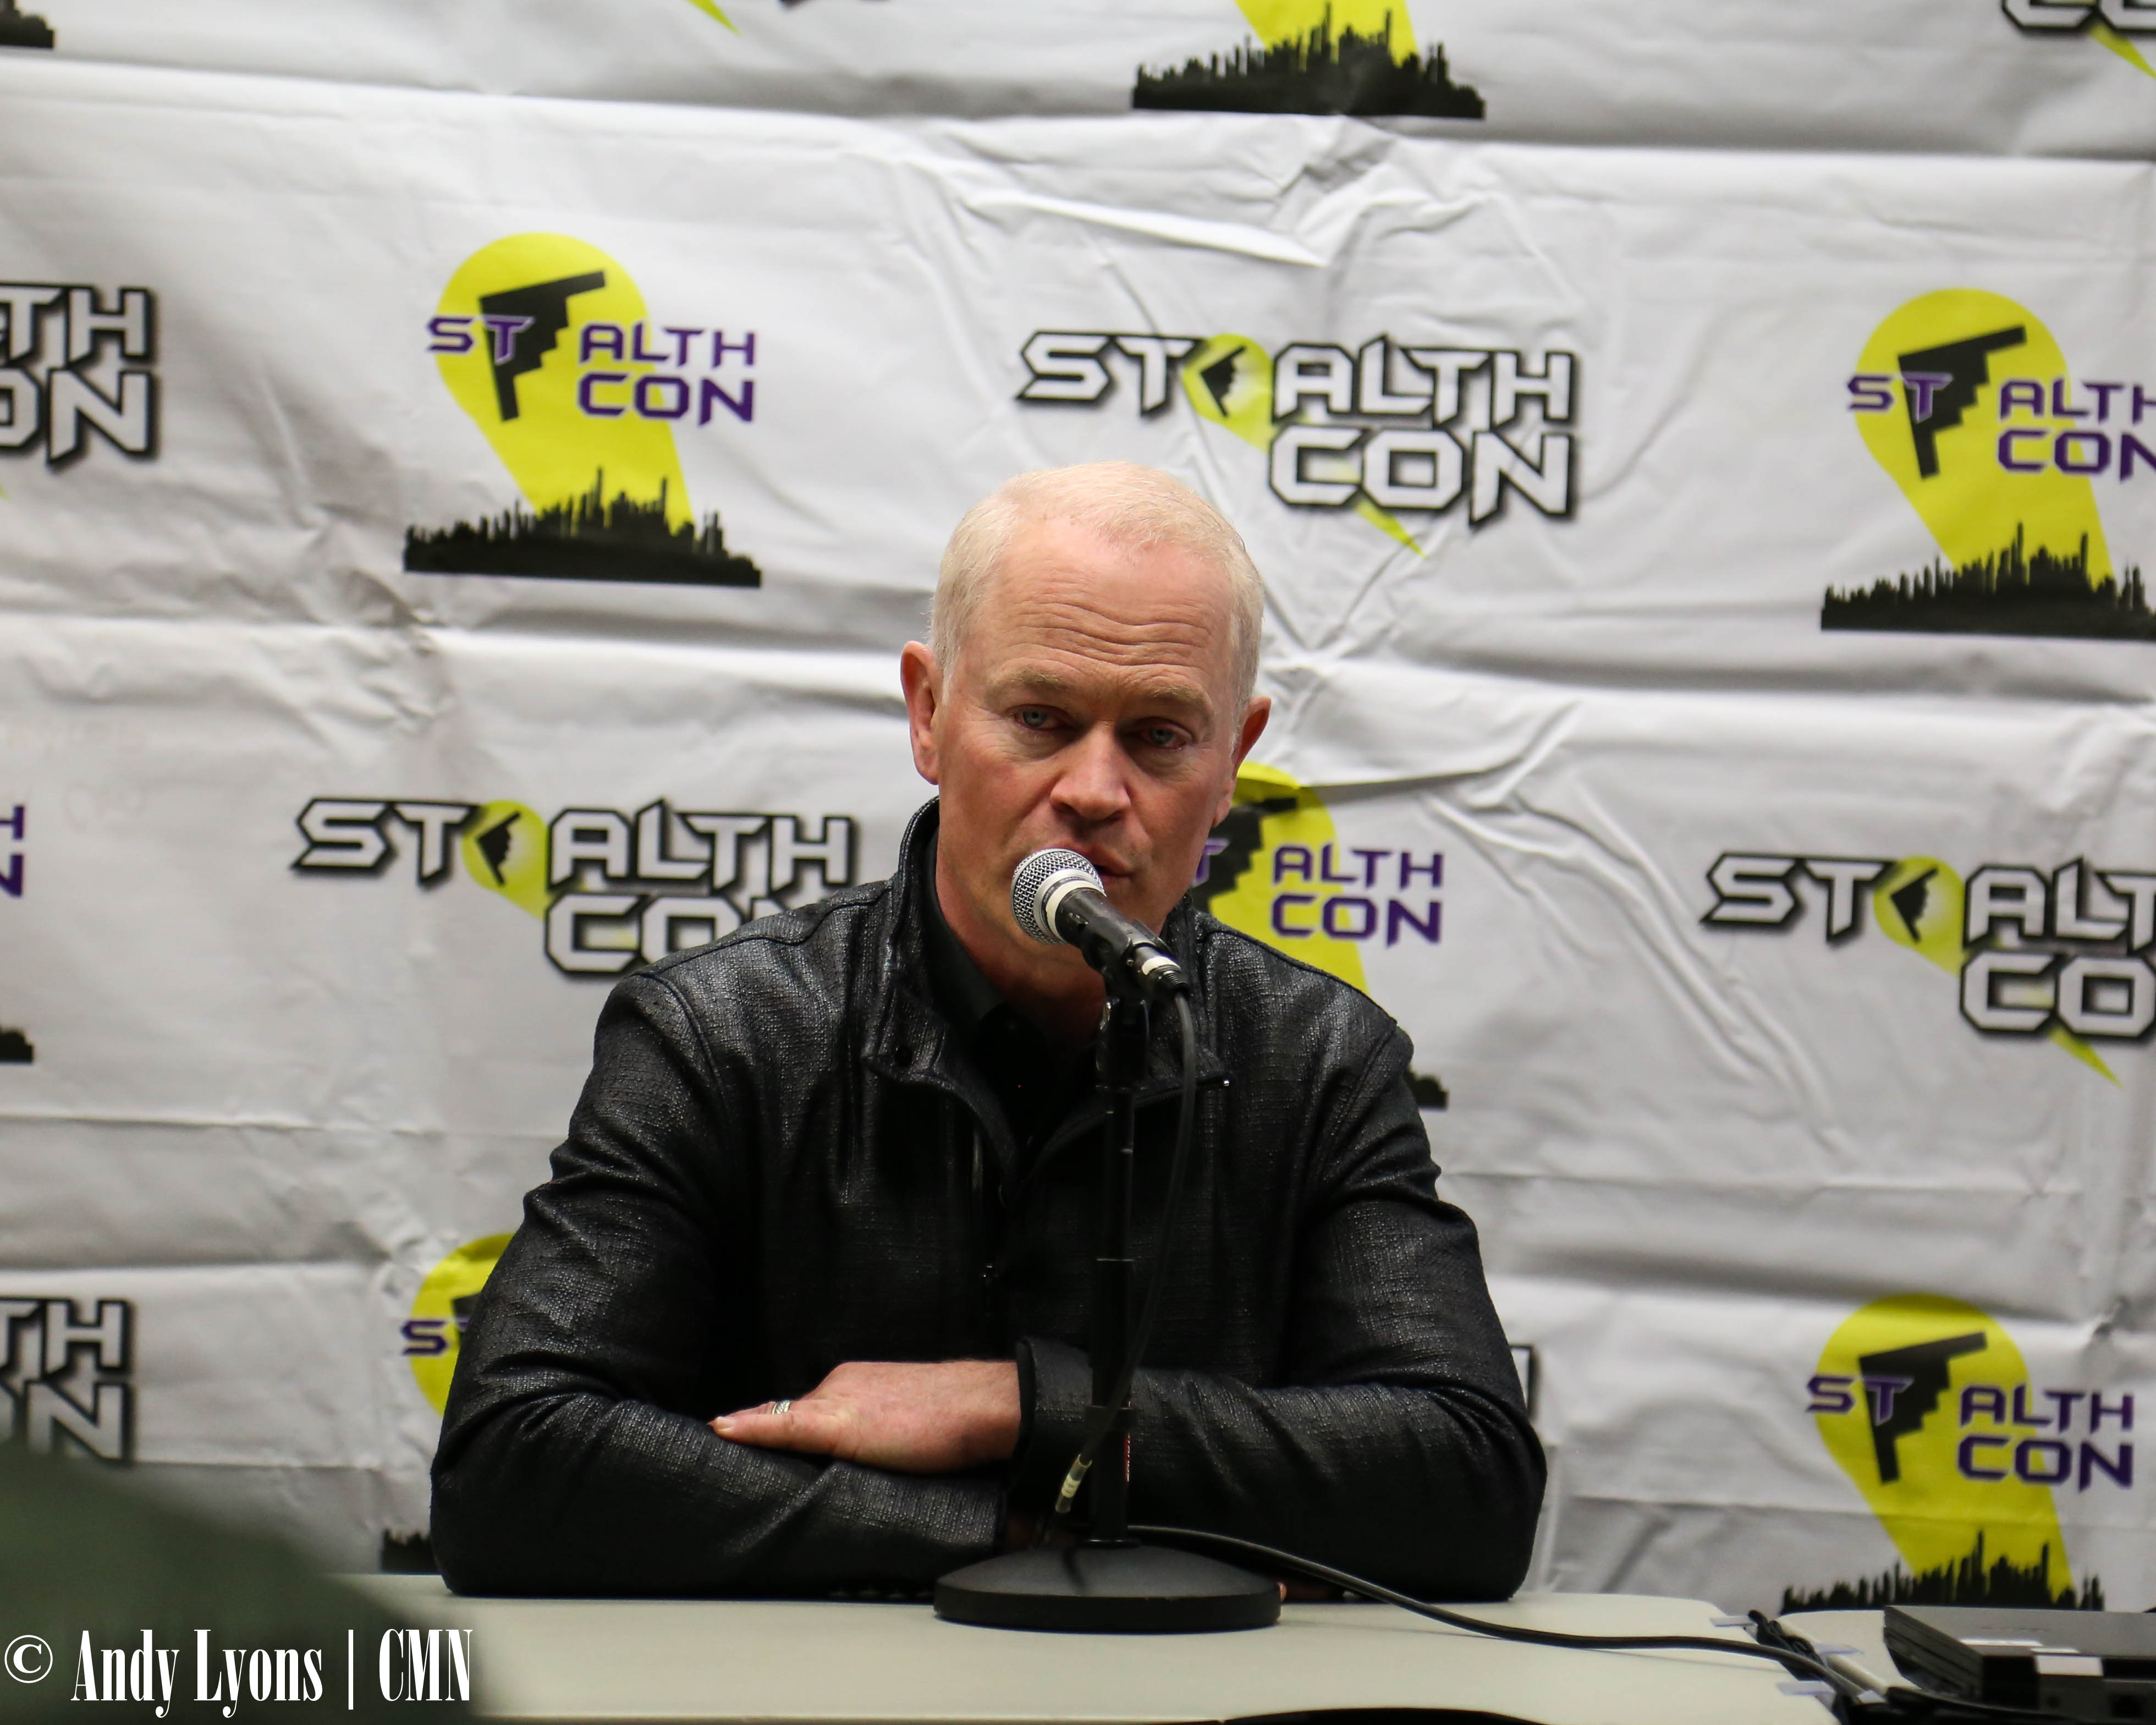 Neal McDonough dazzles fans at Stealth Con